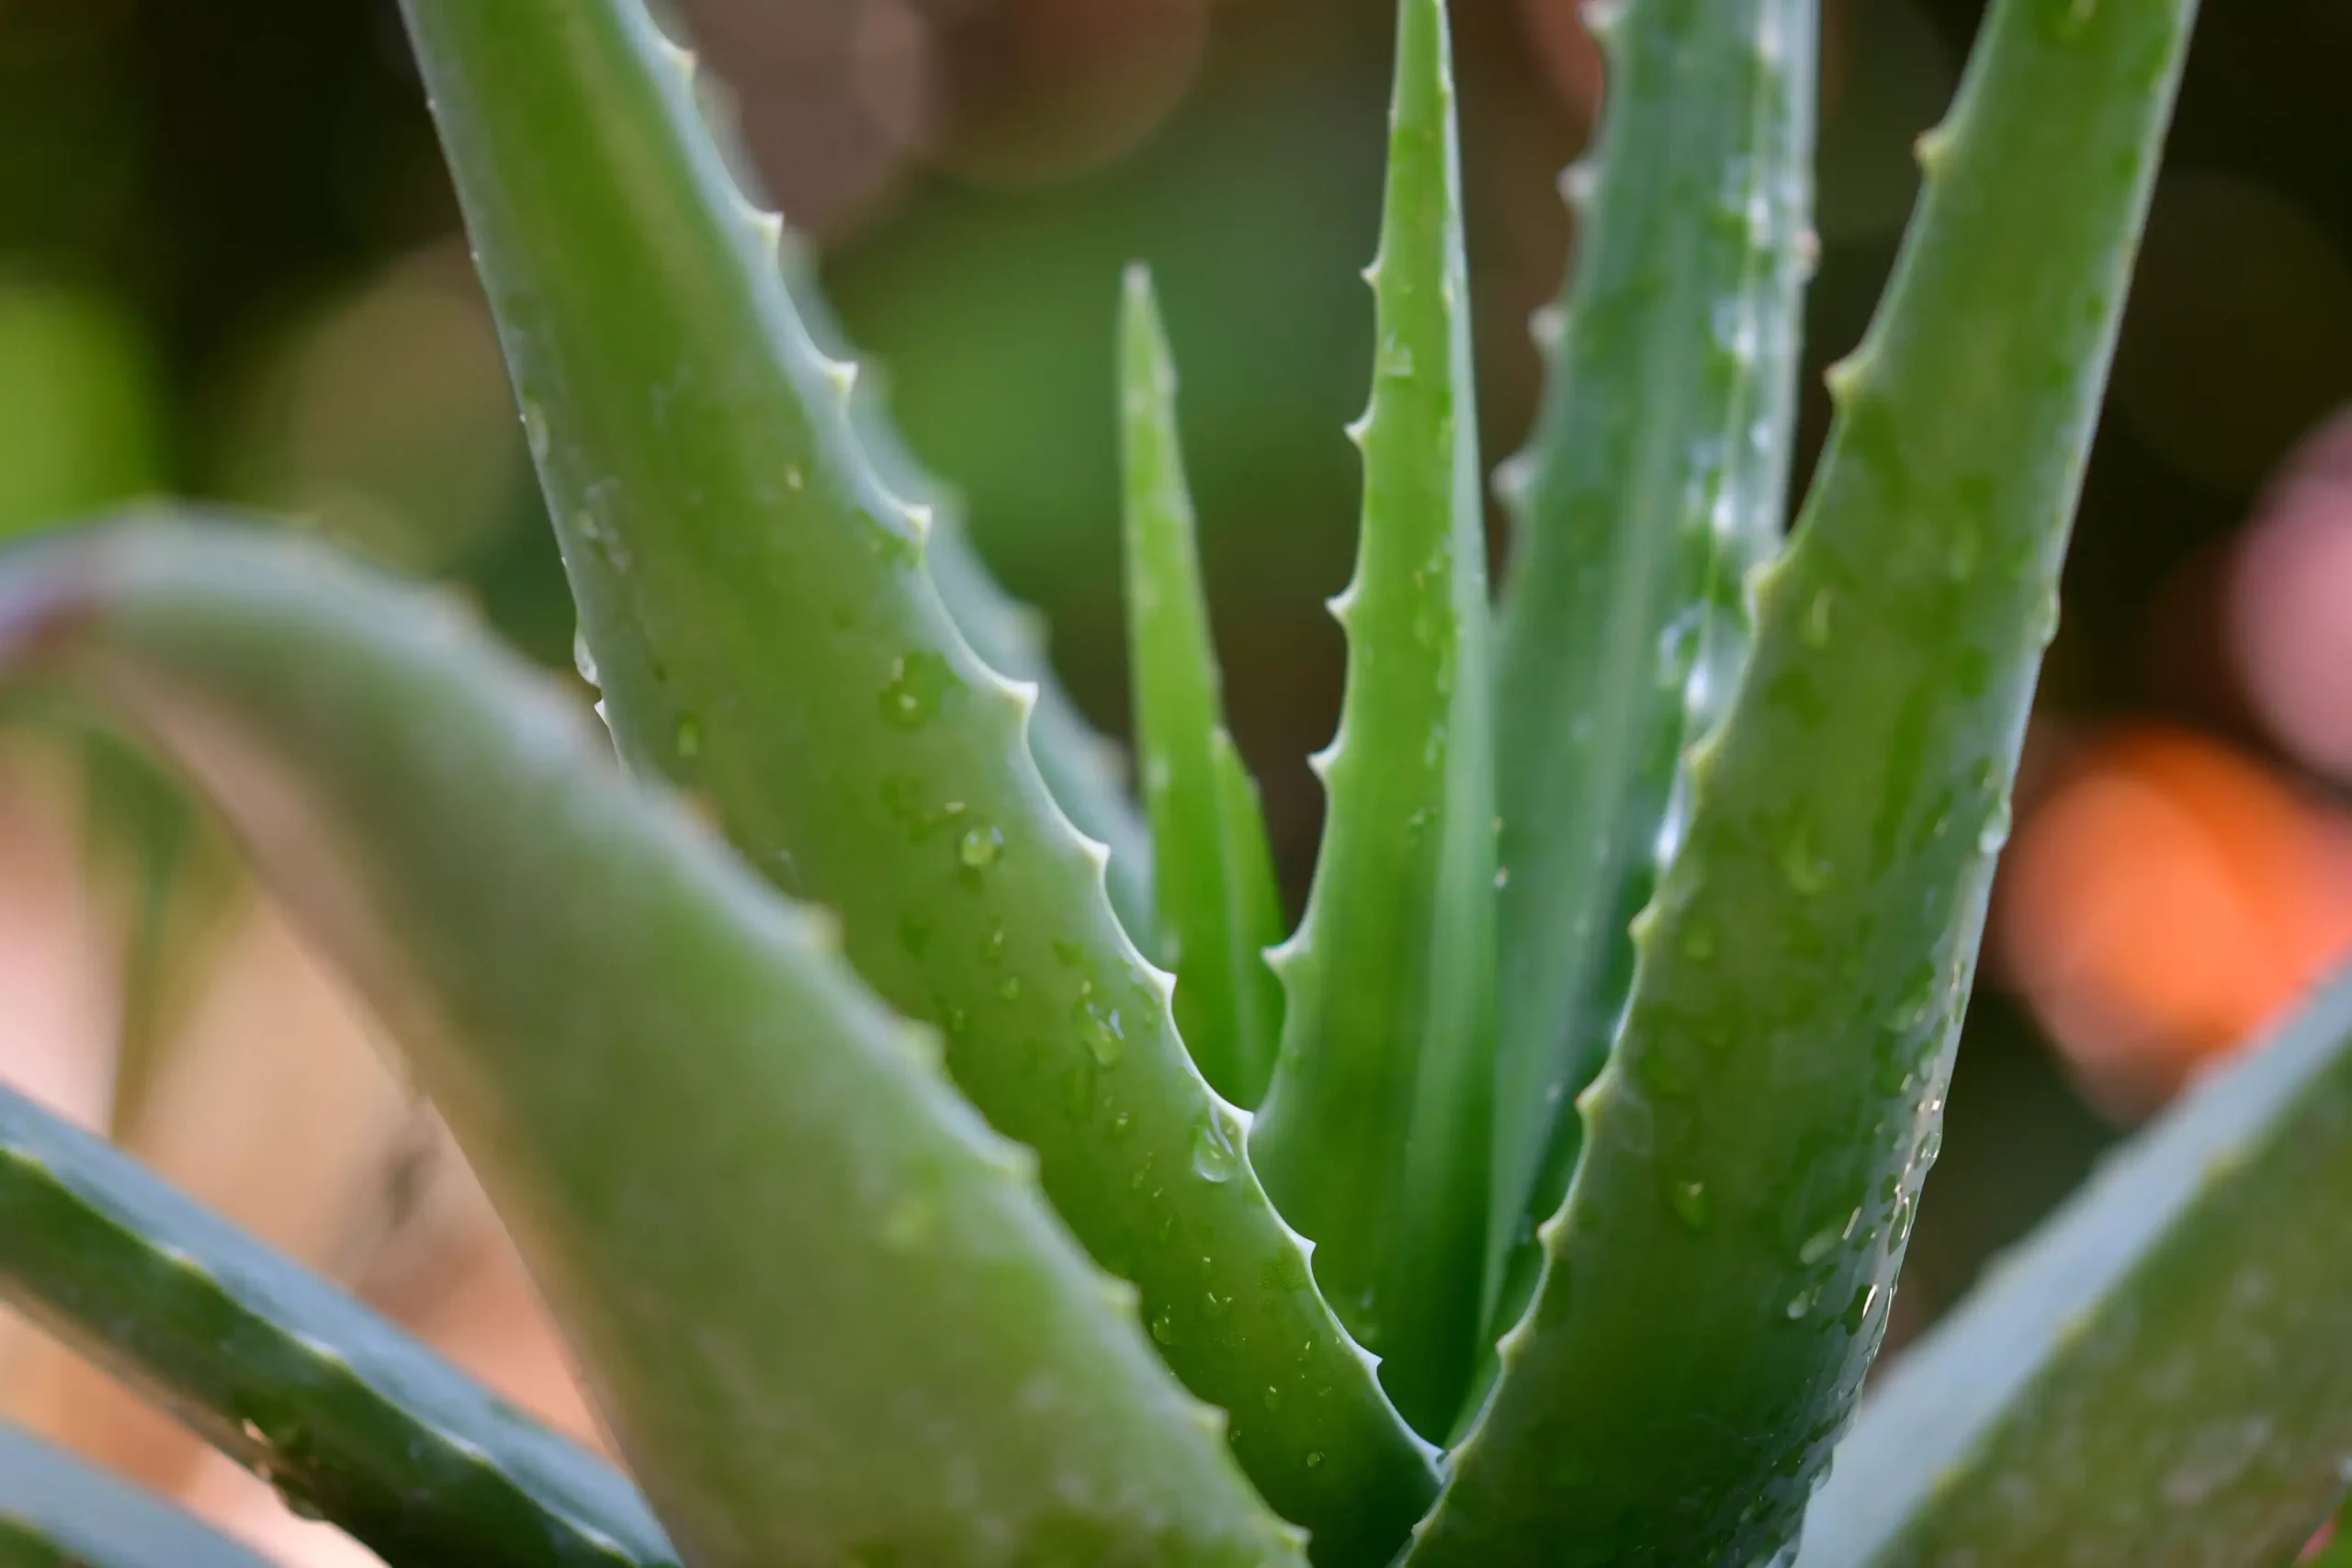 remove spots from face with aloe vera